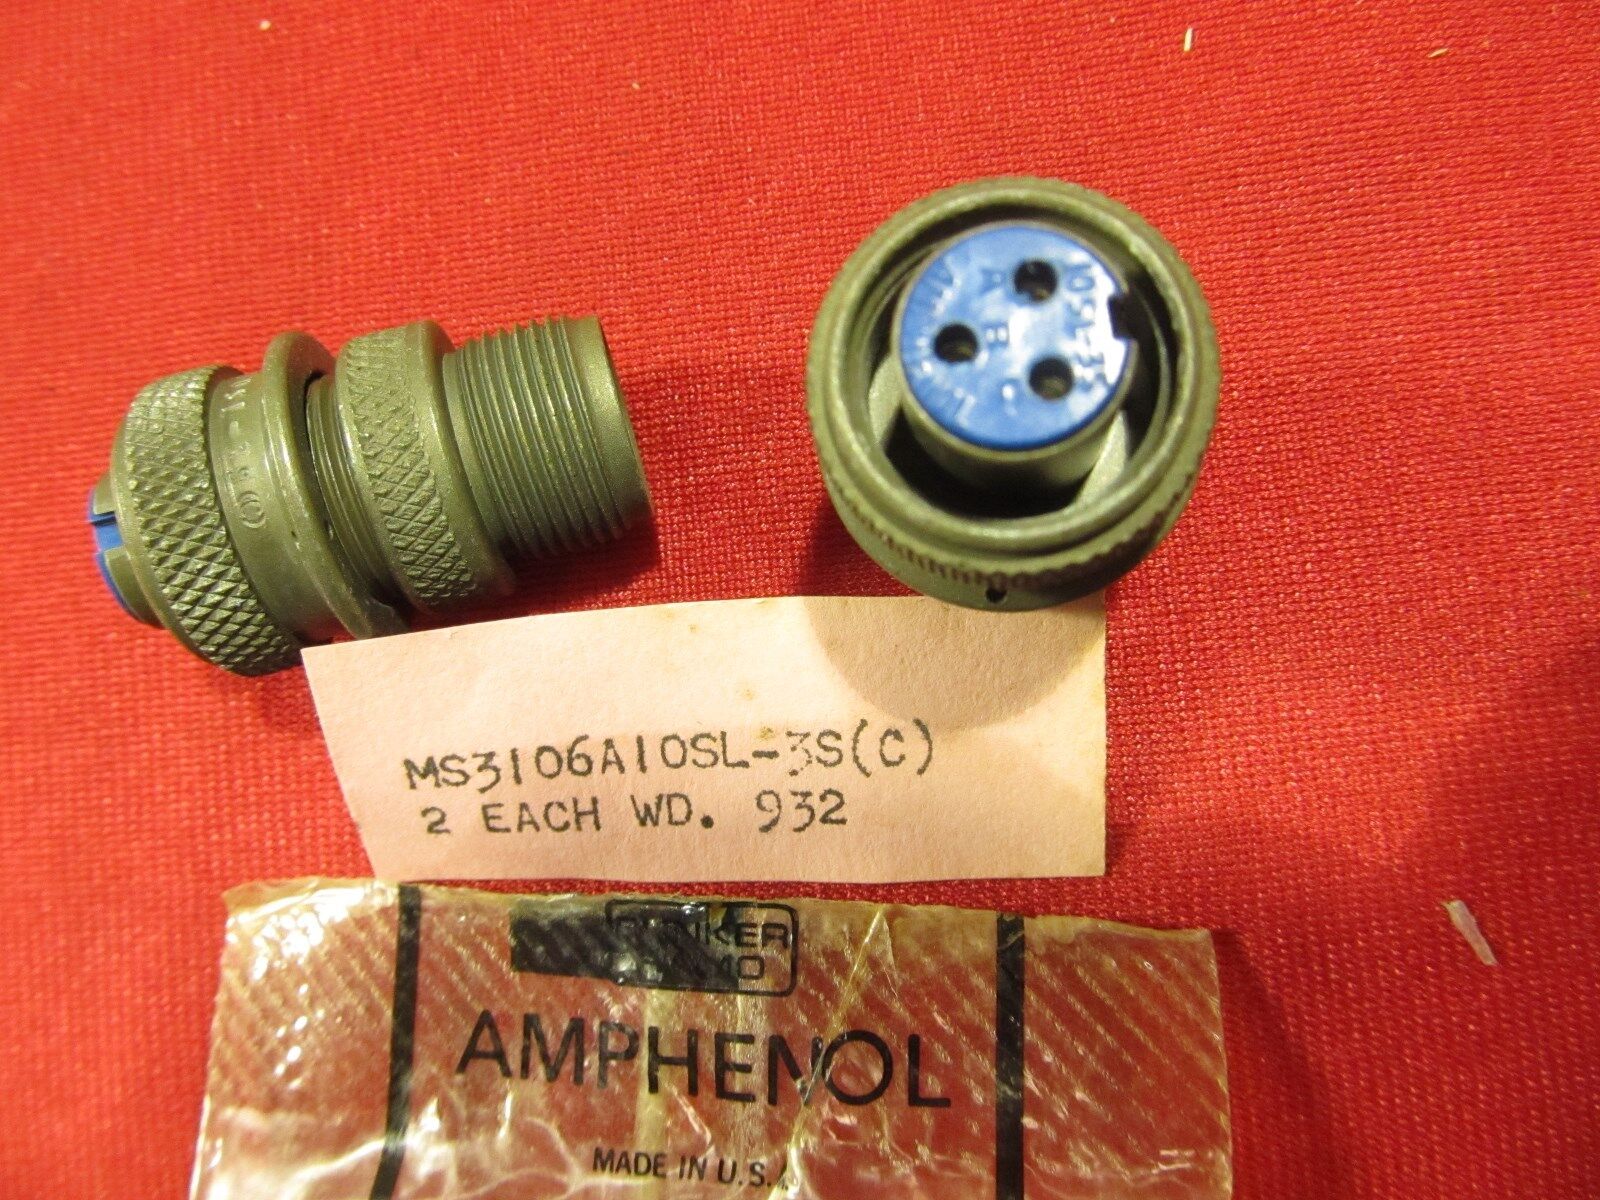 lot of 2 Amphenol AMP Connector Plug used most Turn Bank slip 3 pin MS3106A-10S